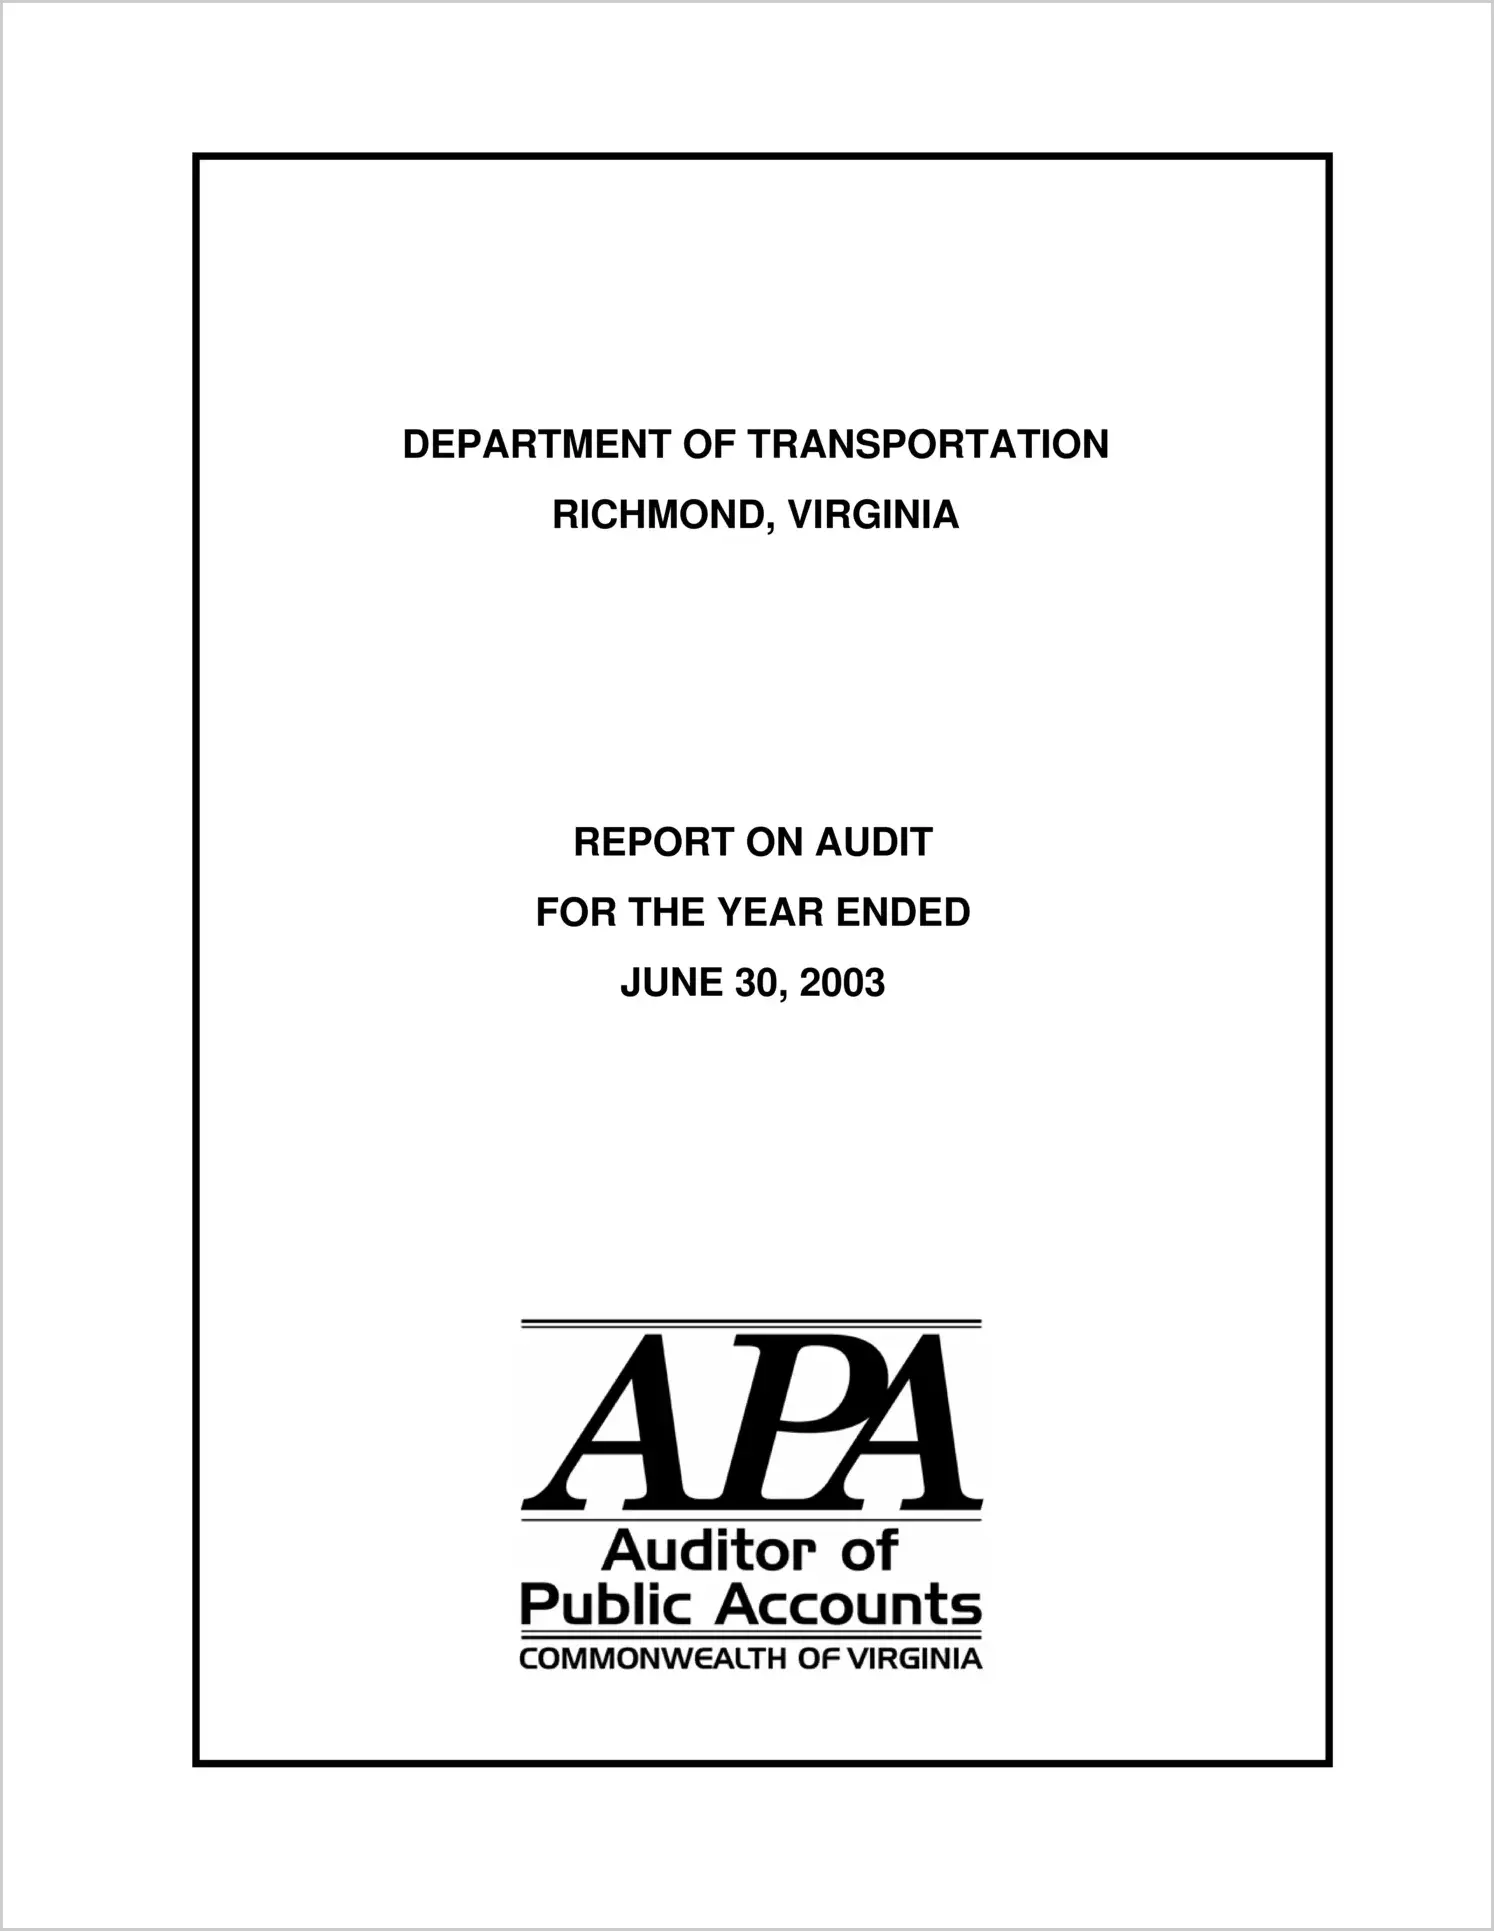 Department of Transportation for the year ended June 30, 2003